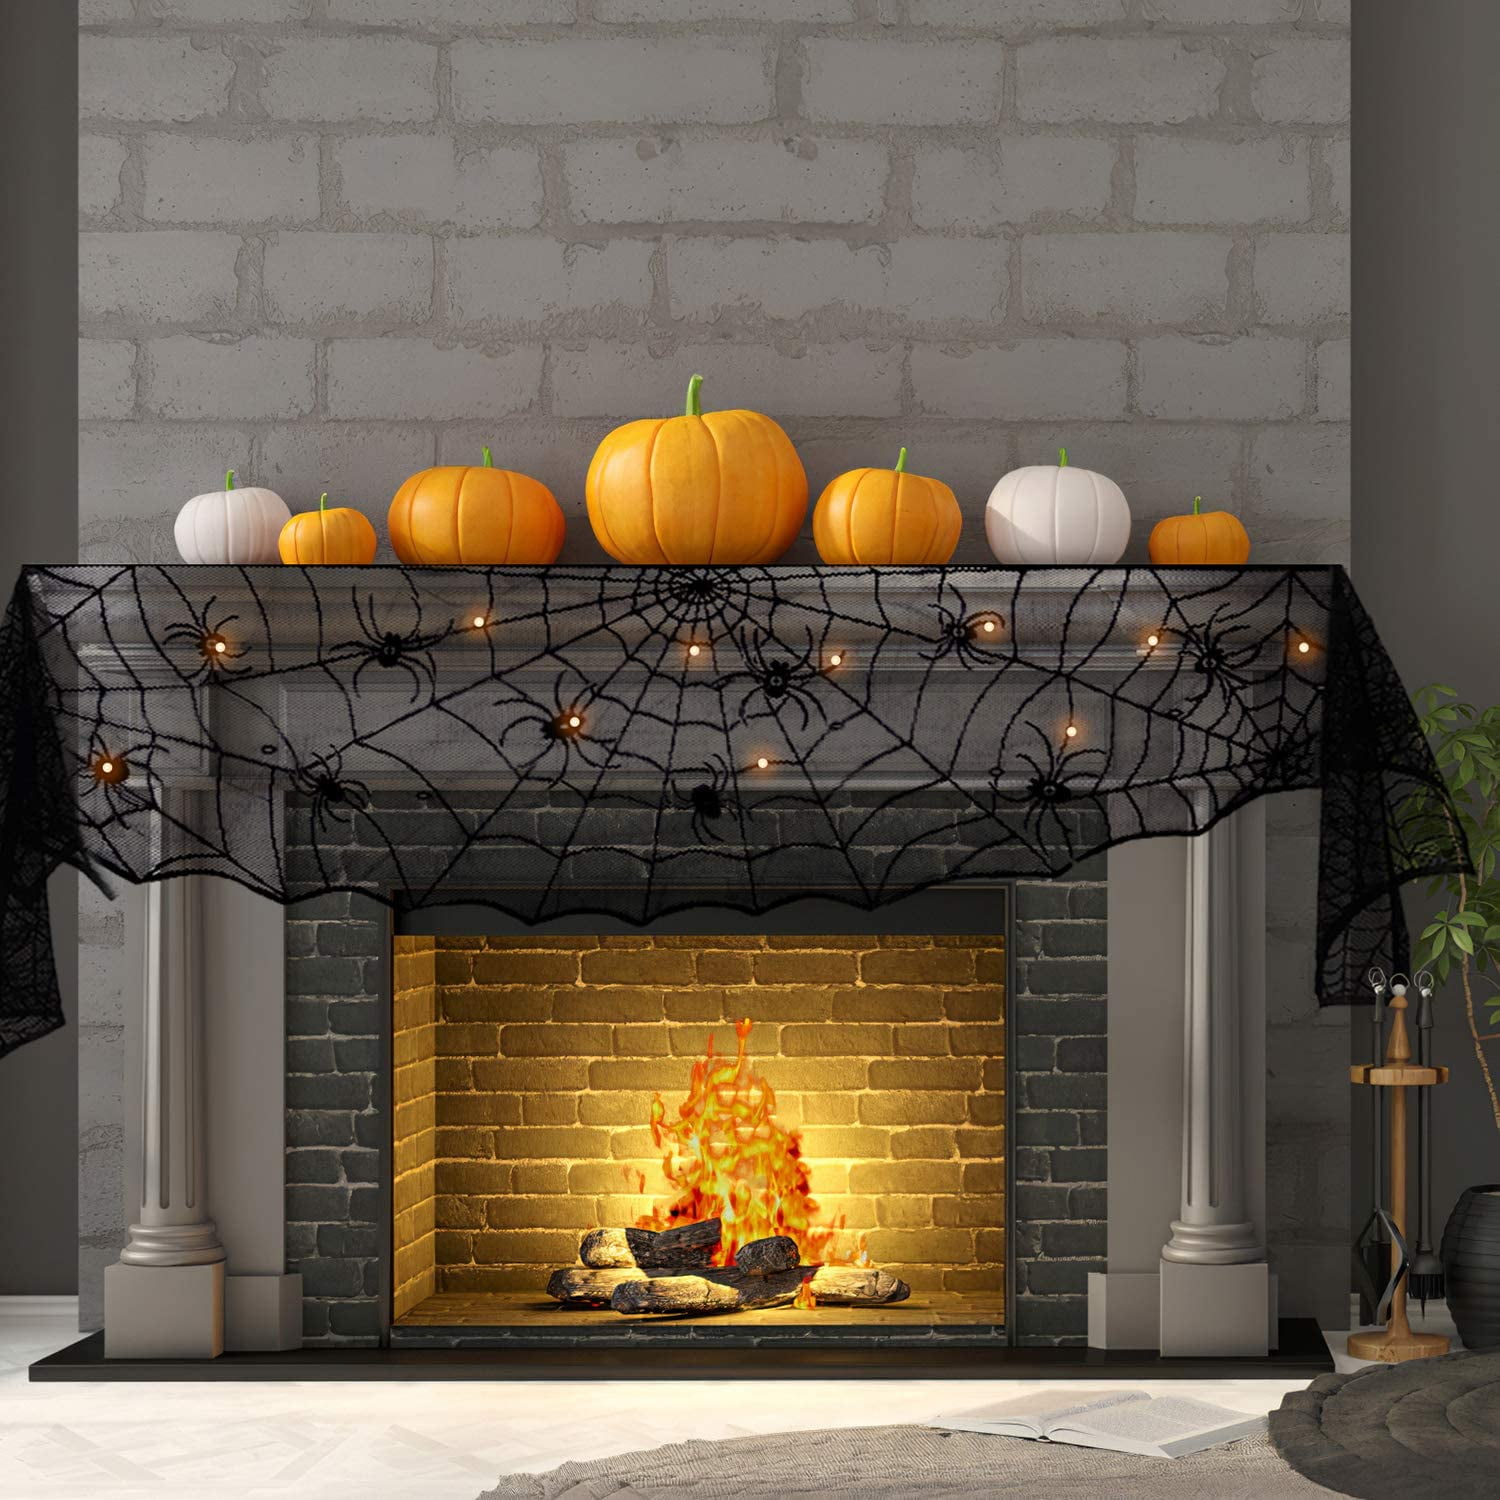 Details about   Halloween Fireplace Decoration Festive Party Supplies Lace Spiderweb Mantle Door 